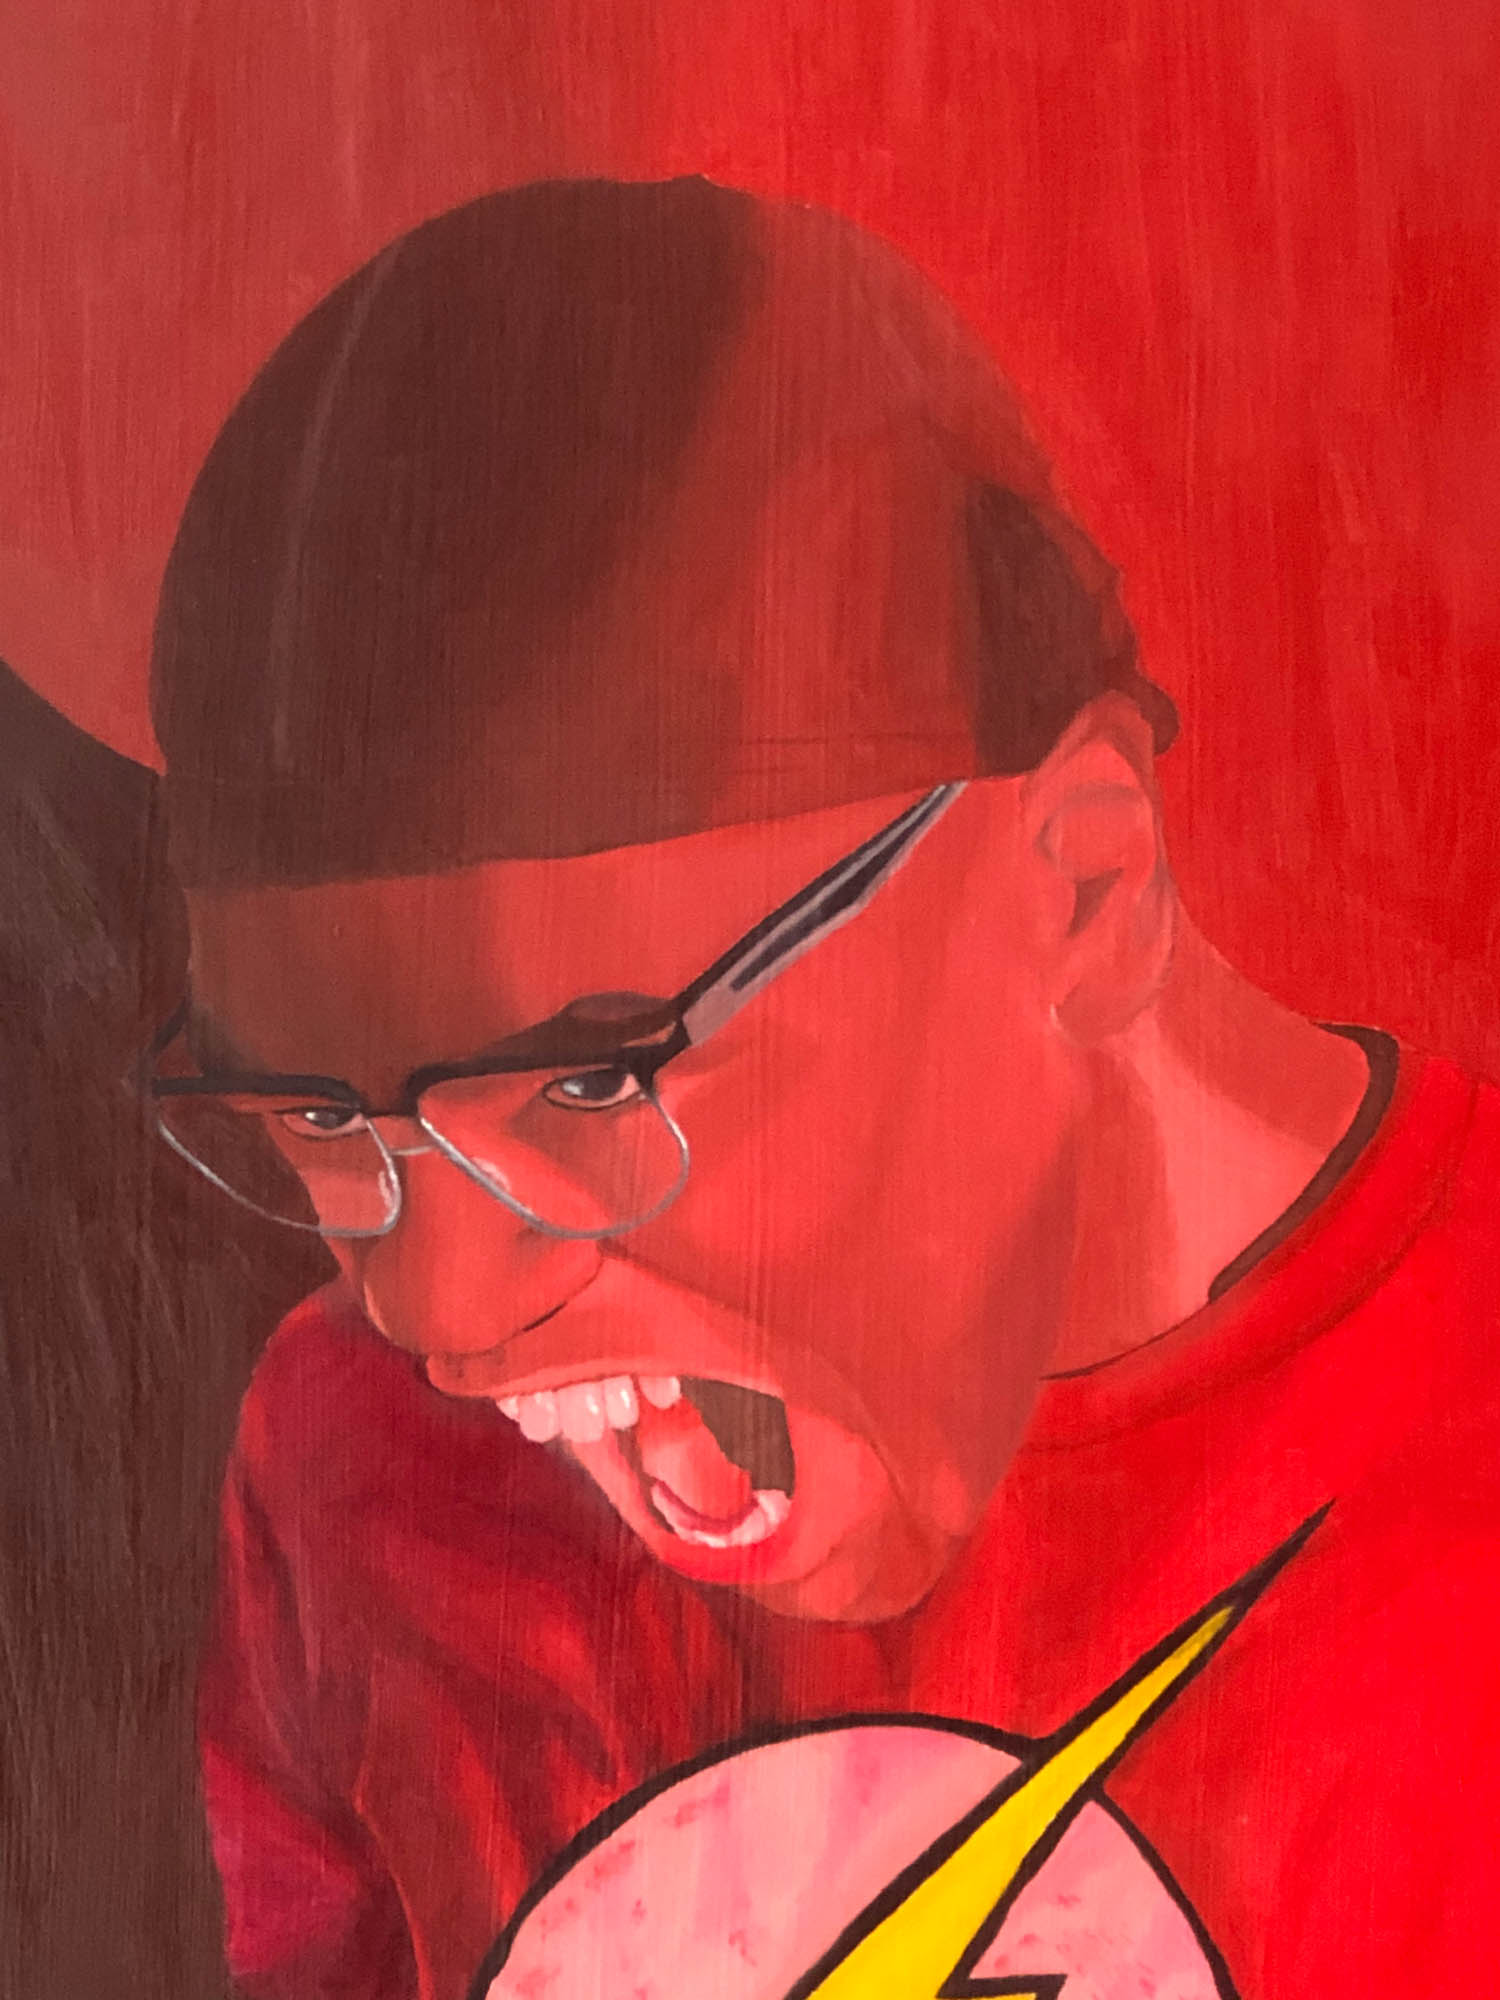 African American male friend emphasizing an emotion of anger. Detailed and textural image of specific brush stroke and paint layering of light reds, dark reds, grays, browns, and blacks on the male figure’s face and facial features, which helps compliments the emotional feeling of “provocation”